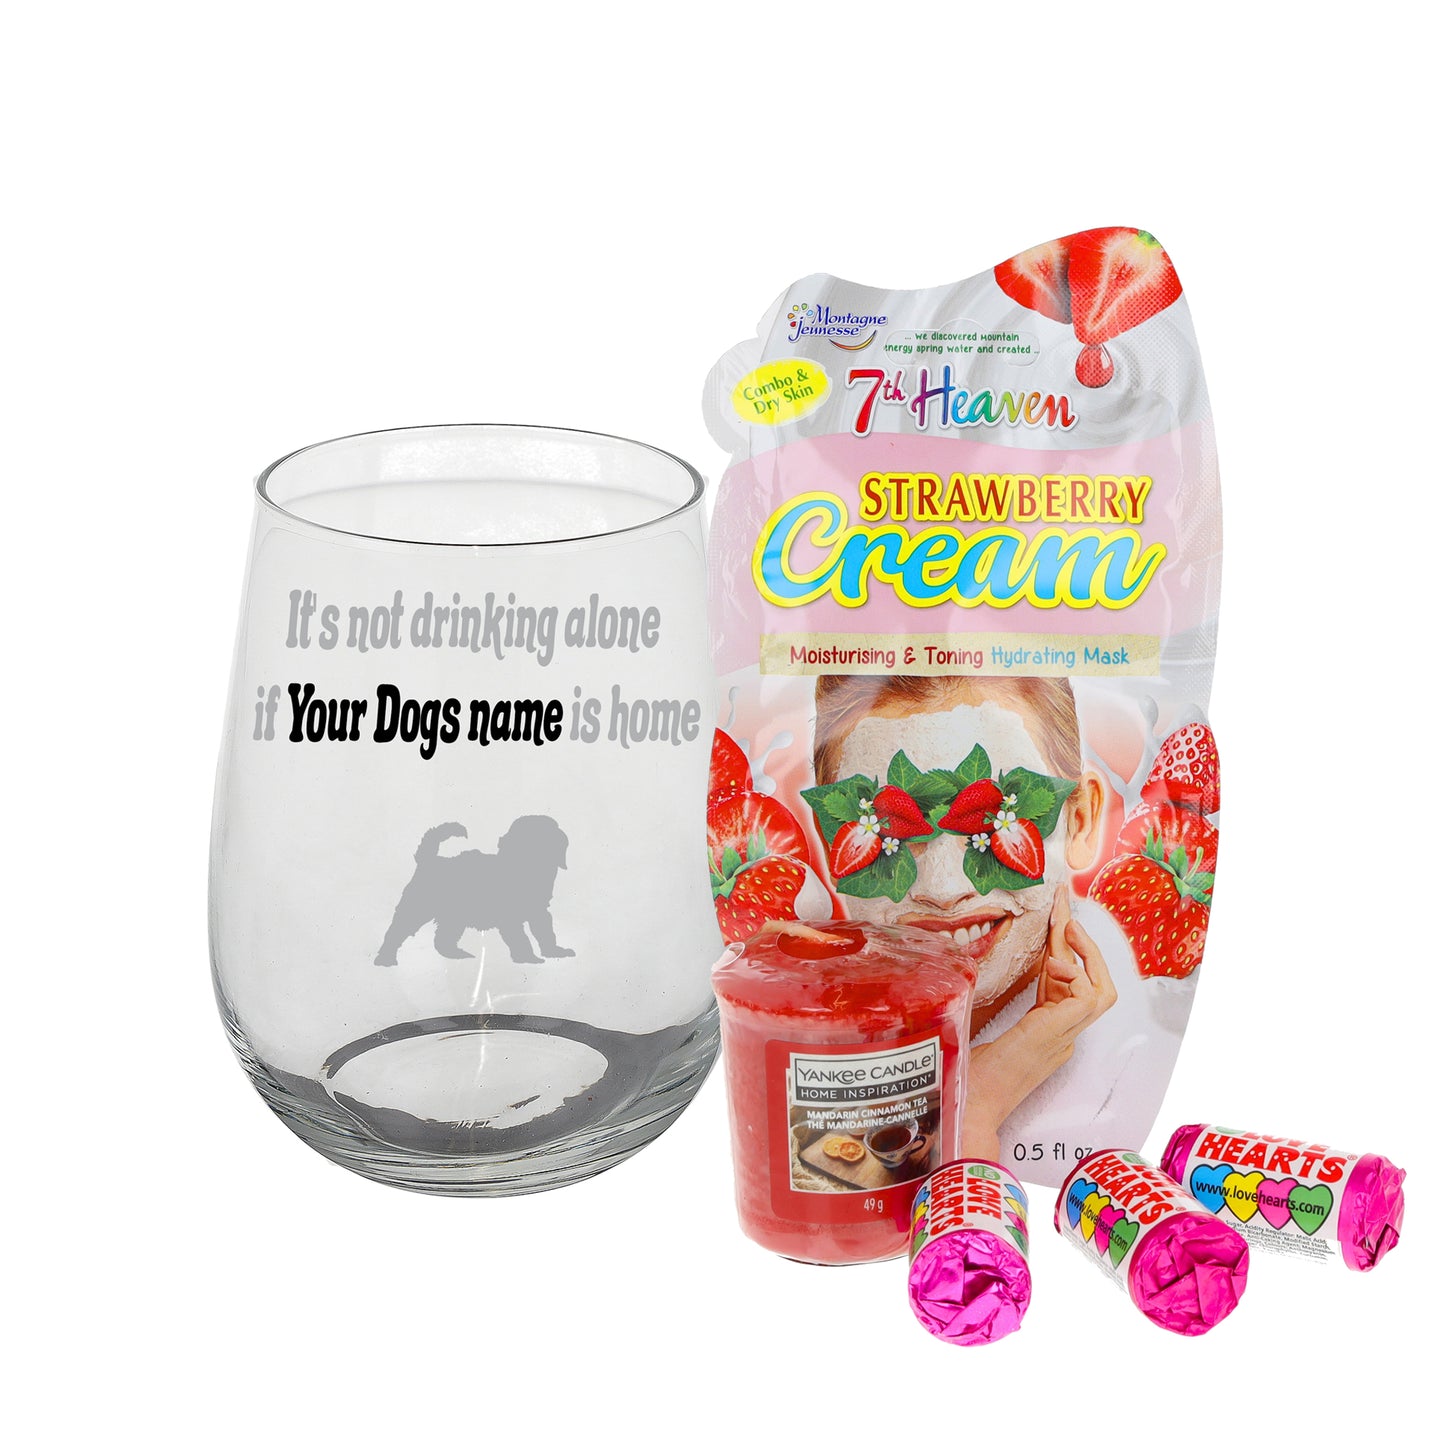 Engraved Personalised Dog Breed Filled Stemless Wine Glass  - Always Looking Good - Filled with Ladies Pamper Products  